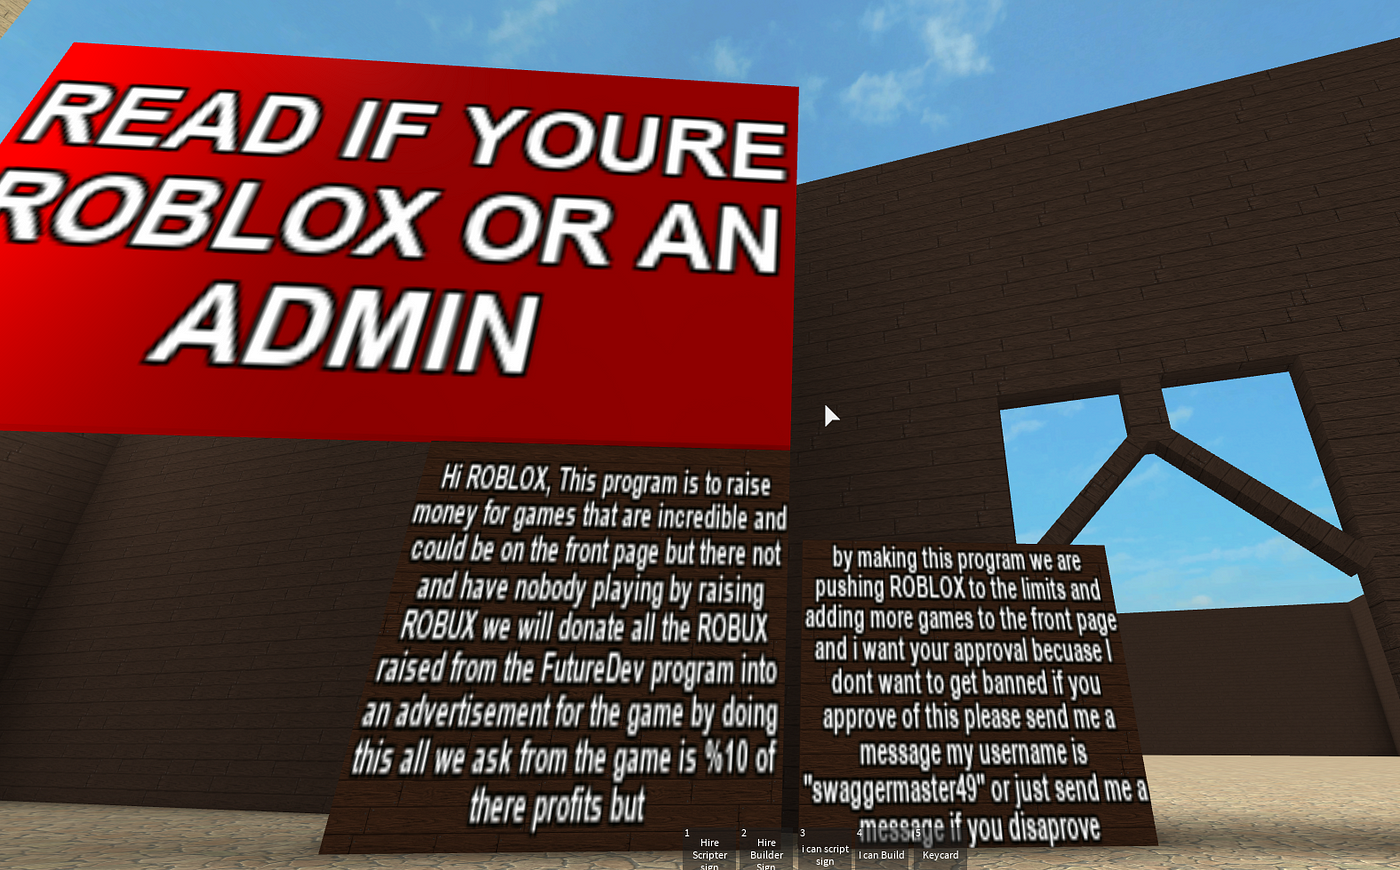 im using this for please donate why isn't it woring? : r/RobloxHelp